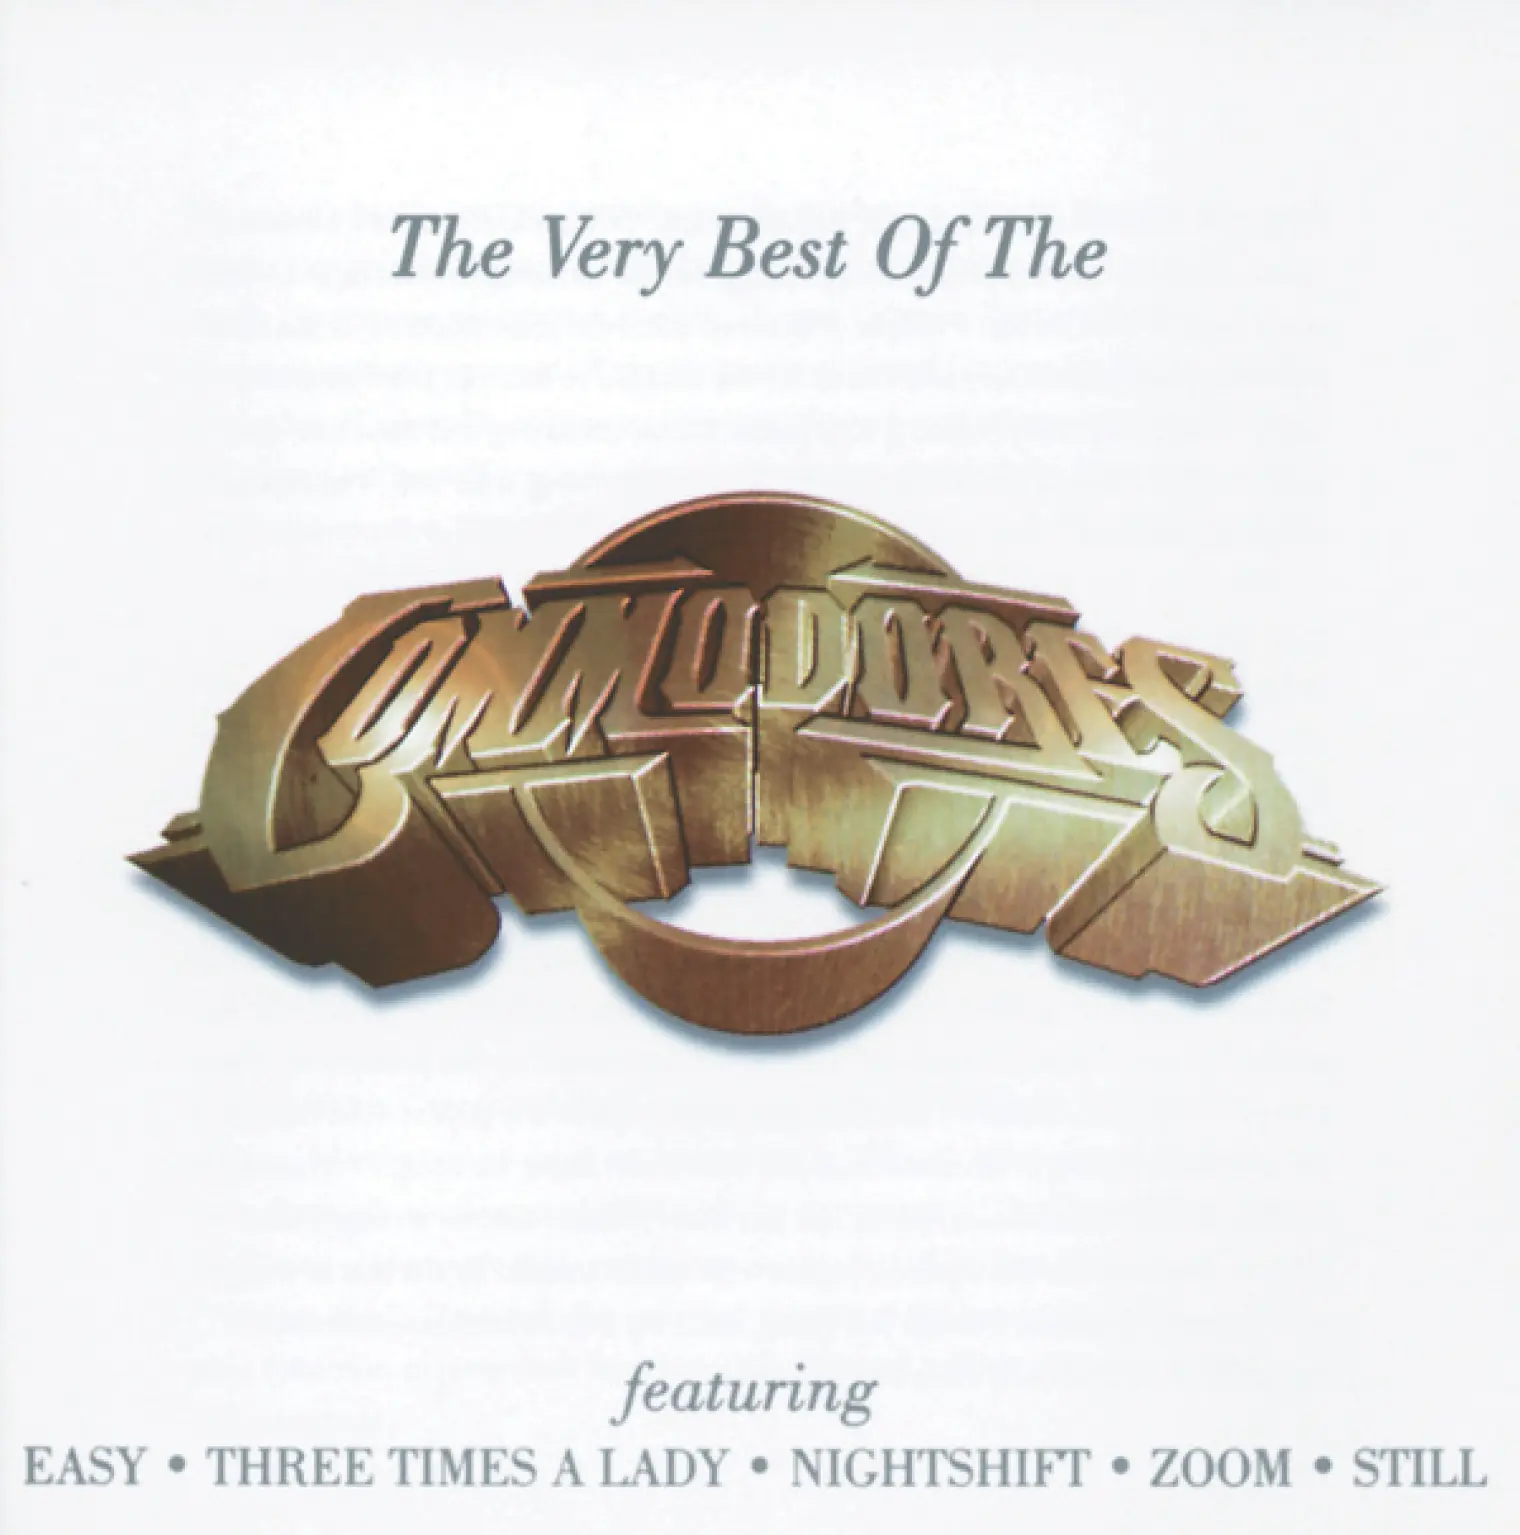 The Very Best Of The Commodores -  Commodores 